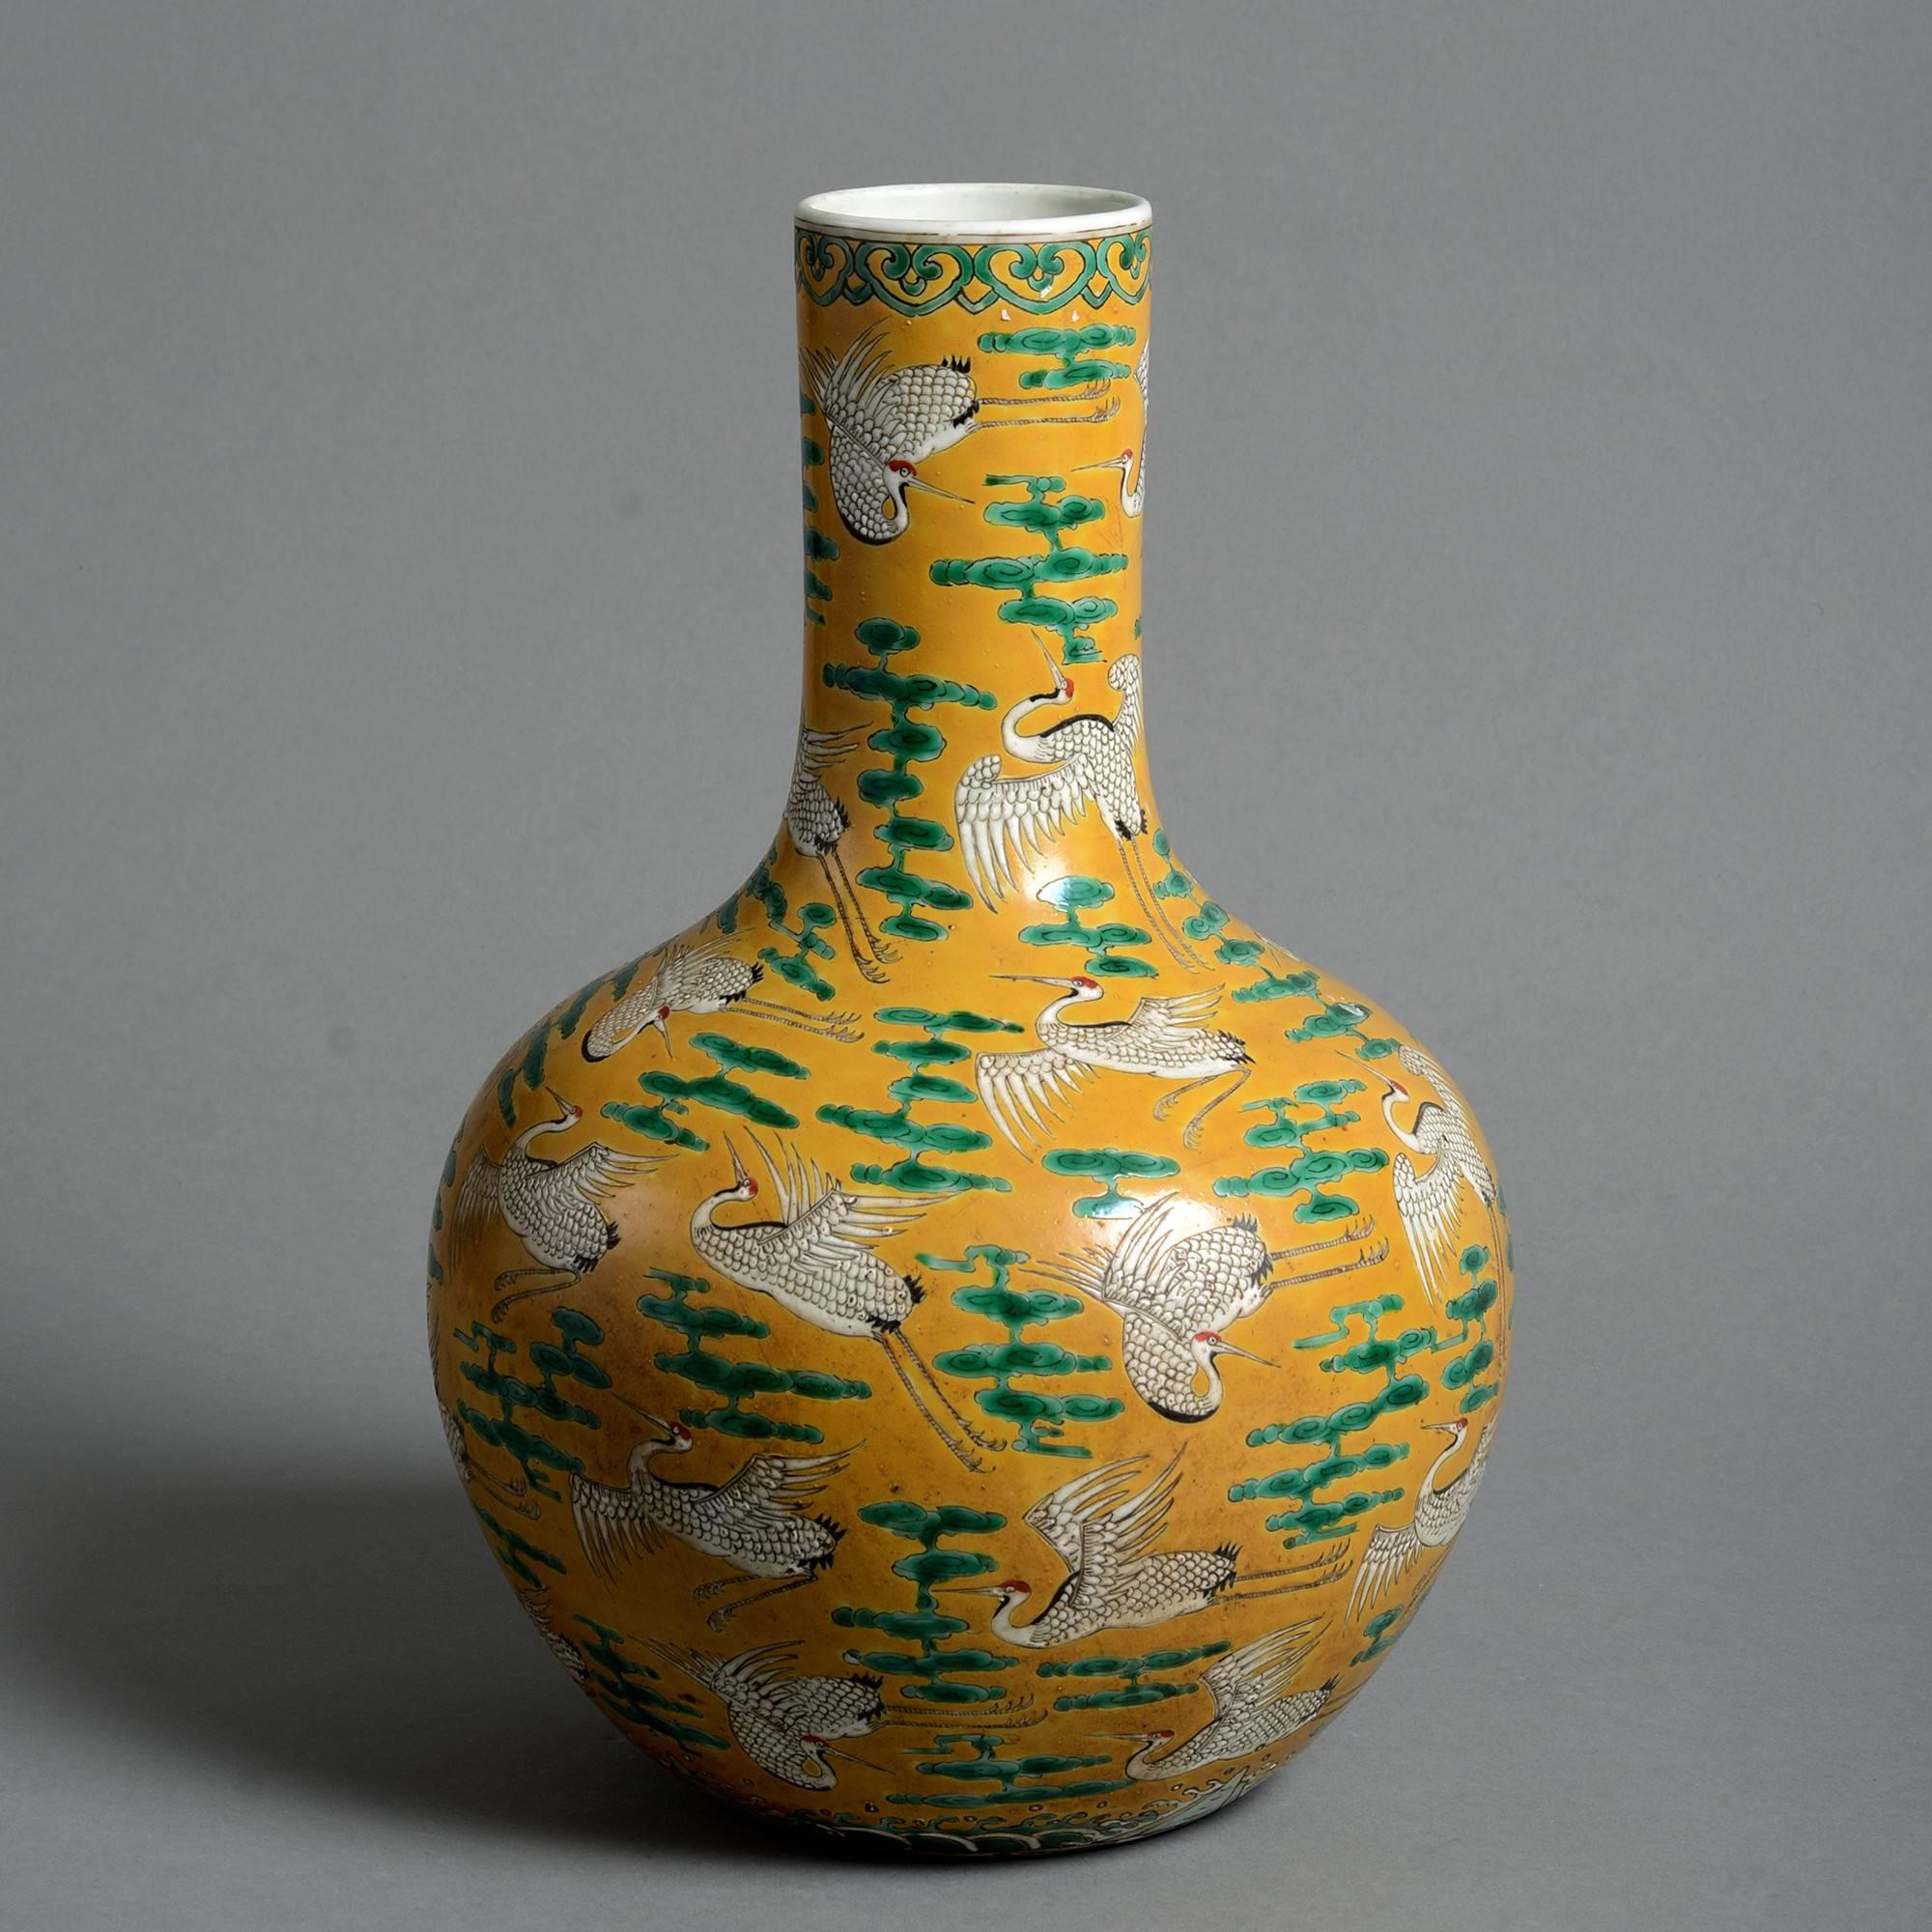 A late 19th century porcelain bottle vase, decorated throughout with cranes and clouds in white, red, black and green glazes upon a mustard yellow ground. With character marks to the underside. 

Qing dynasty, Guangxu period (1875-1908).